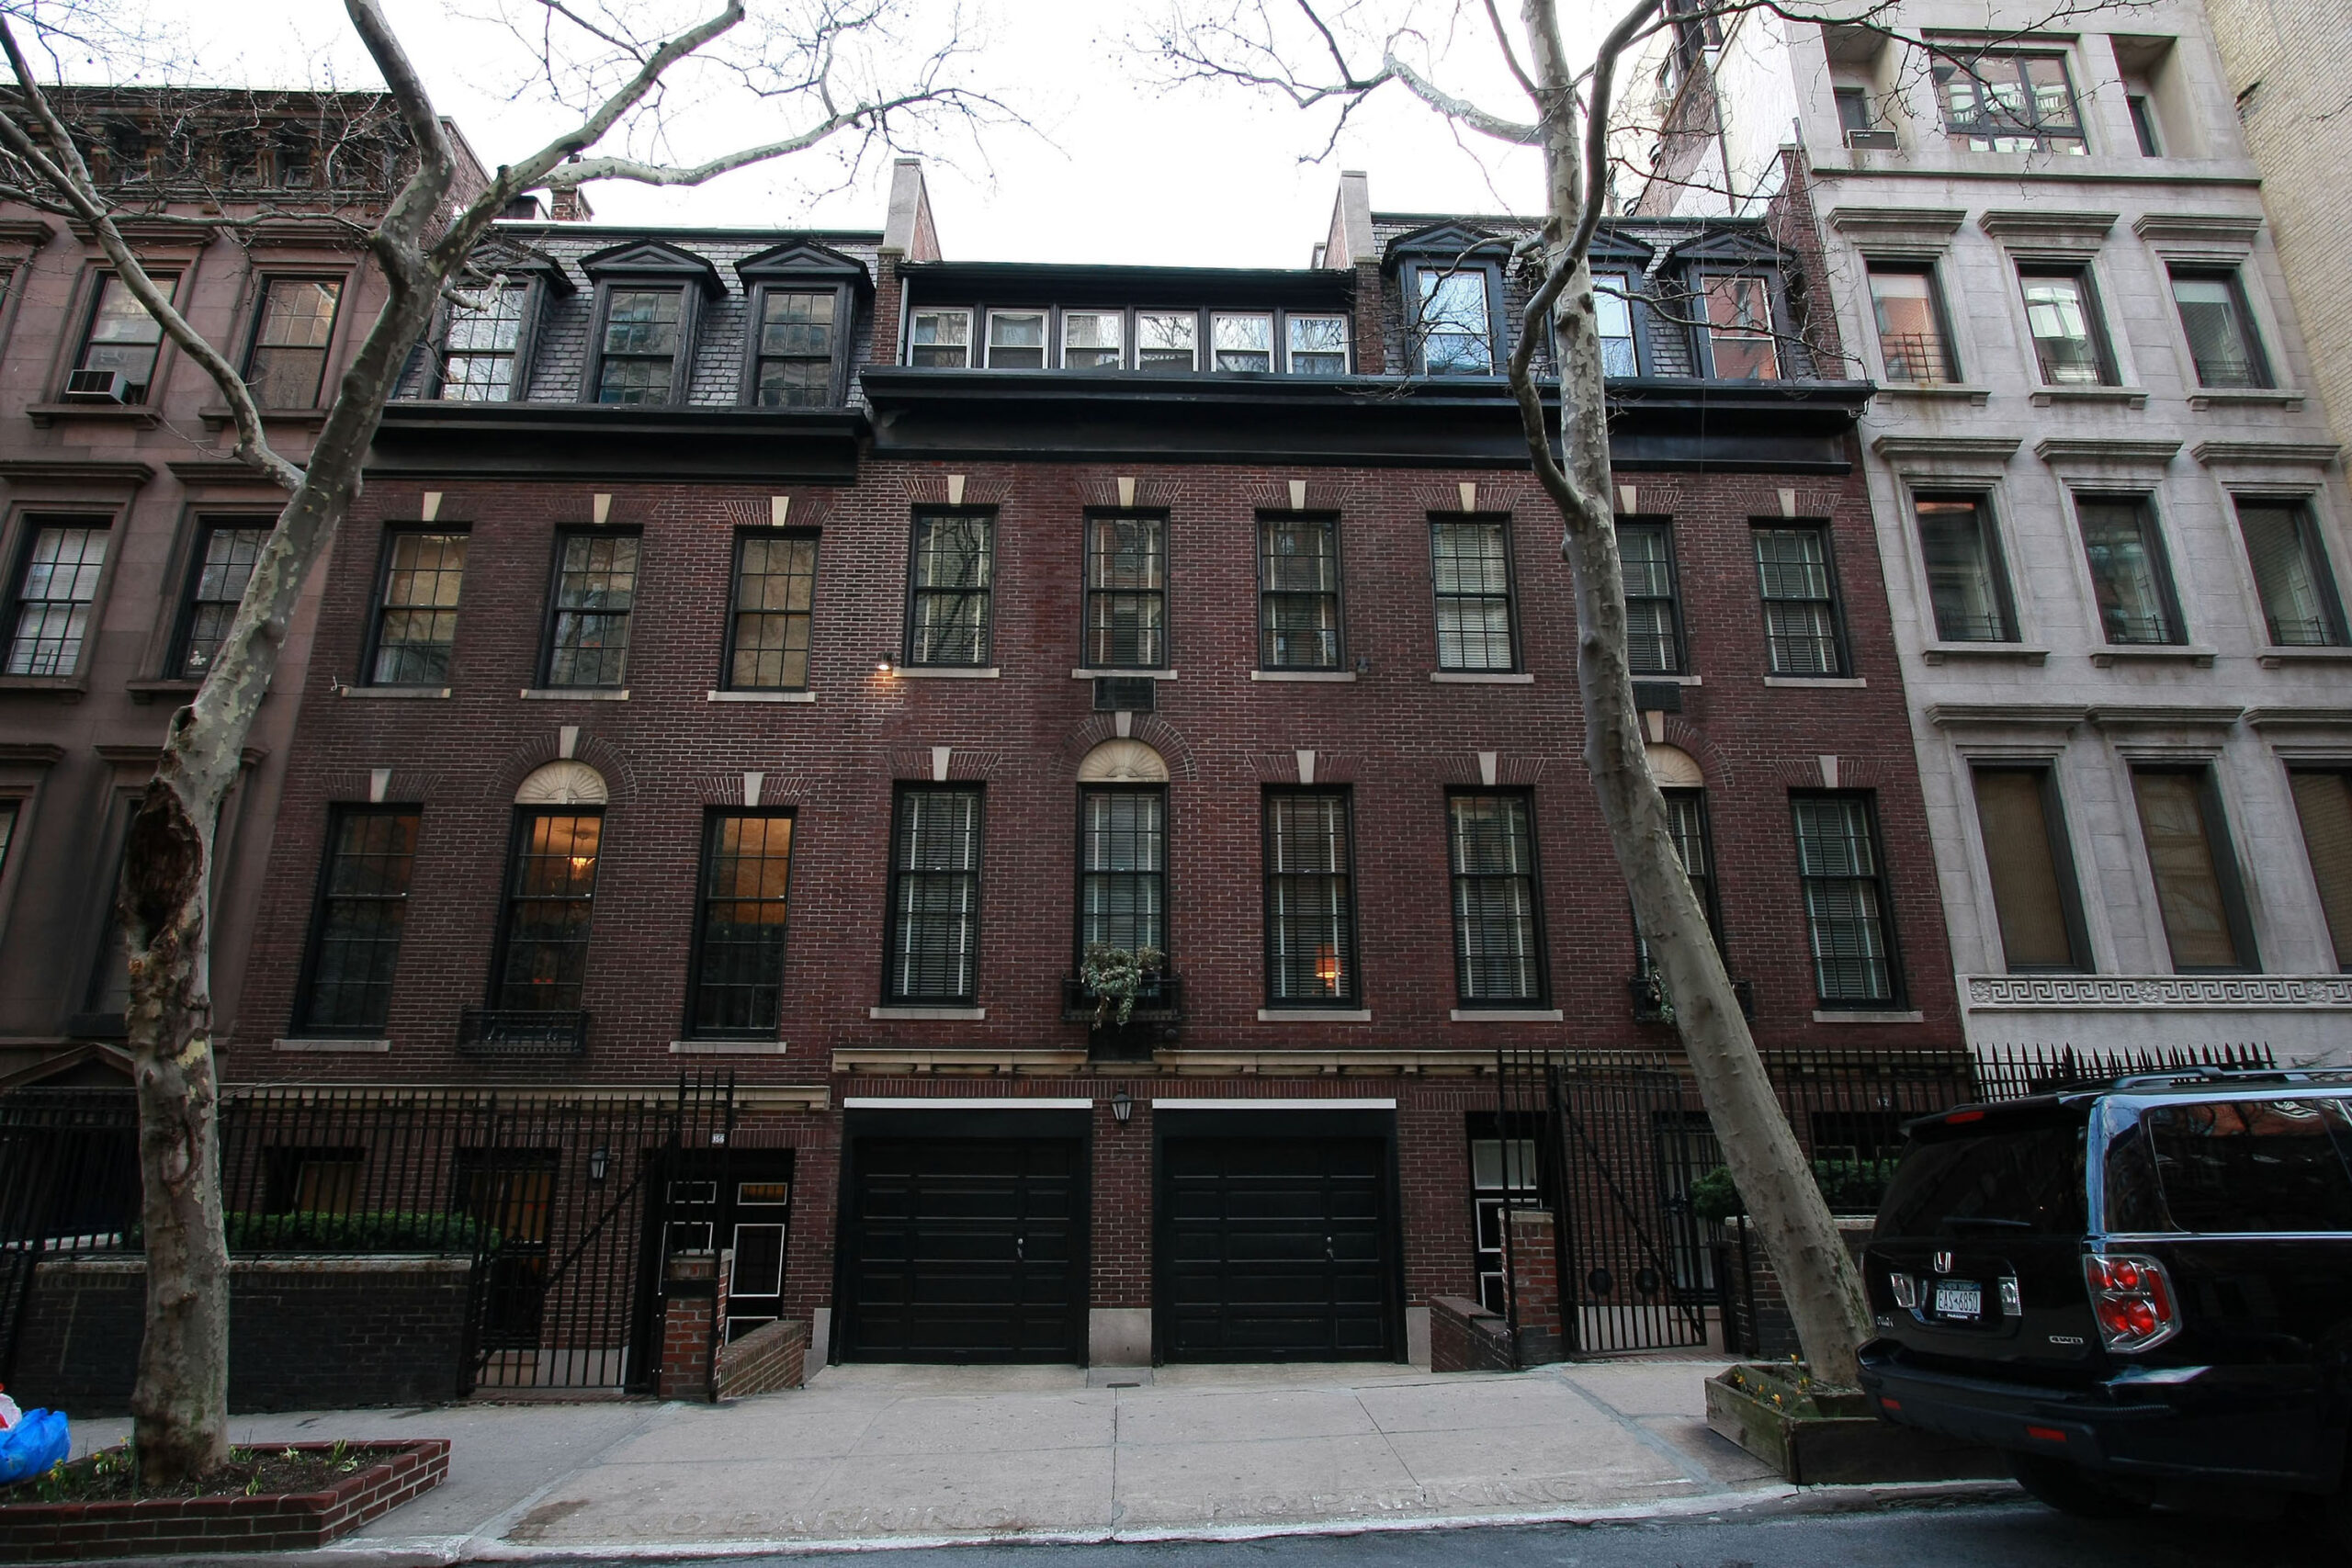 Exterior of the New York townhouse